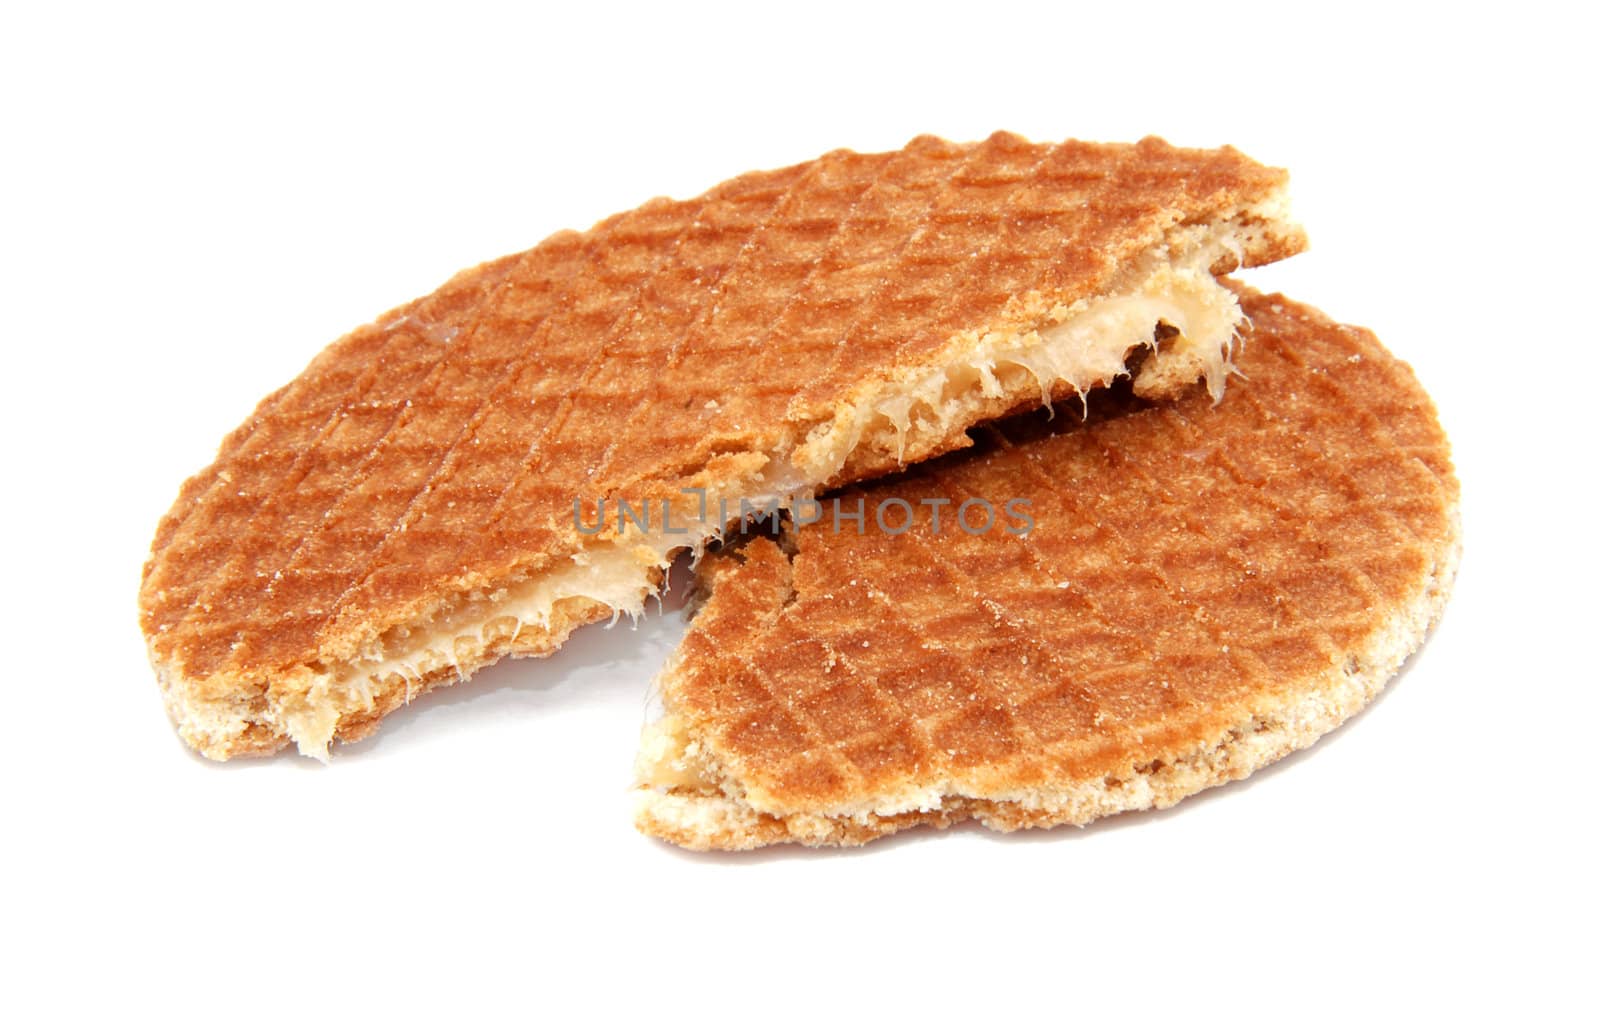 Stroopwafel, Dutch caramel waffle broken in half, isolated on a white background